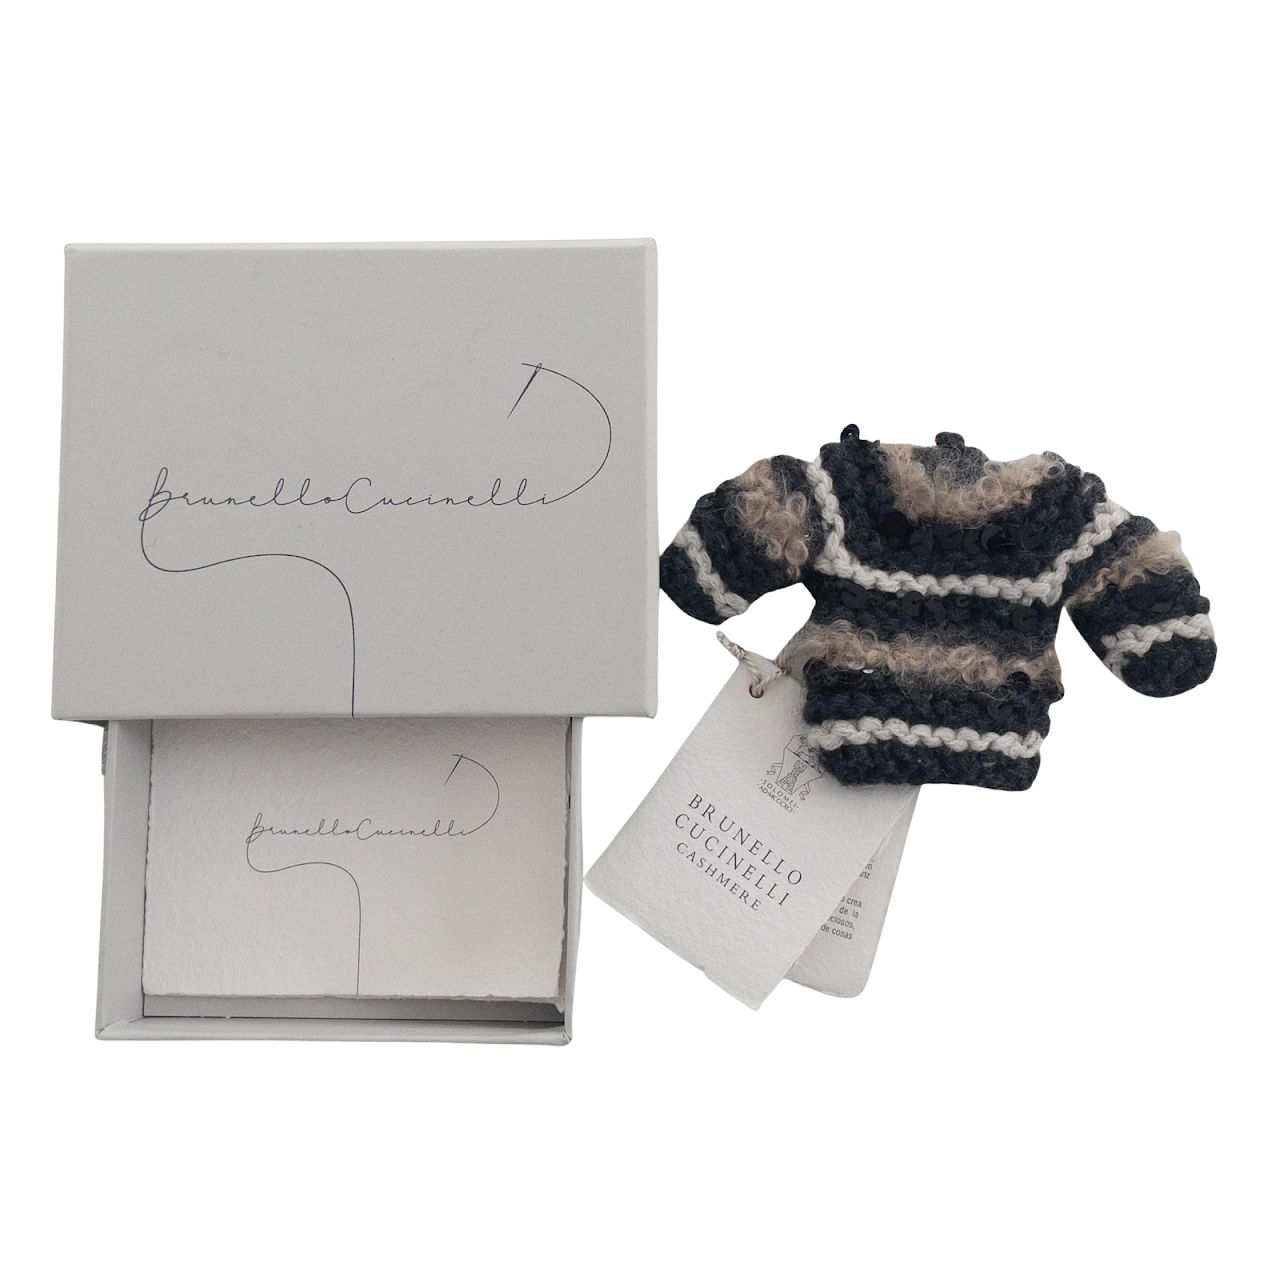 Brunello Cucinelli NEW Tiny Knits Cashmere Sweater Key Fob